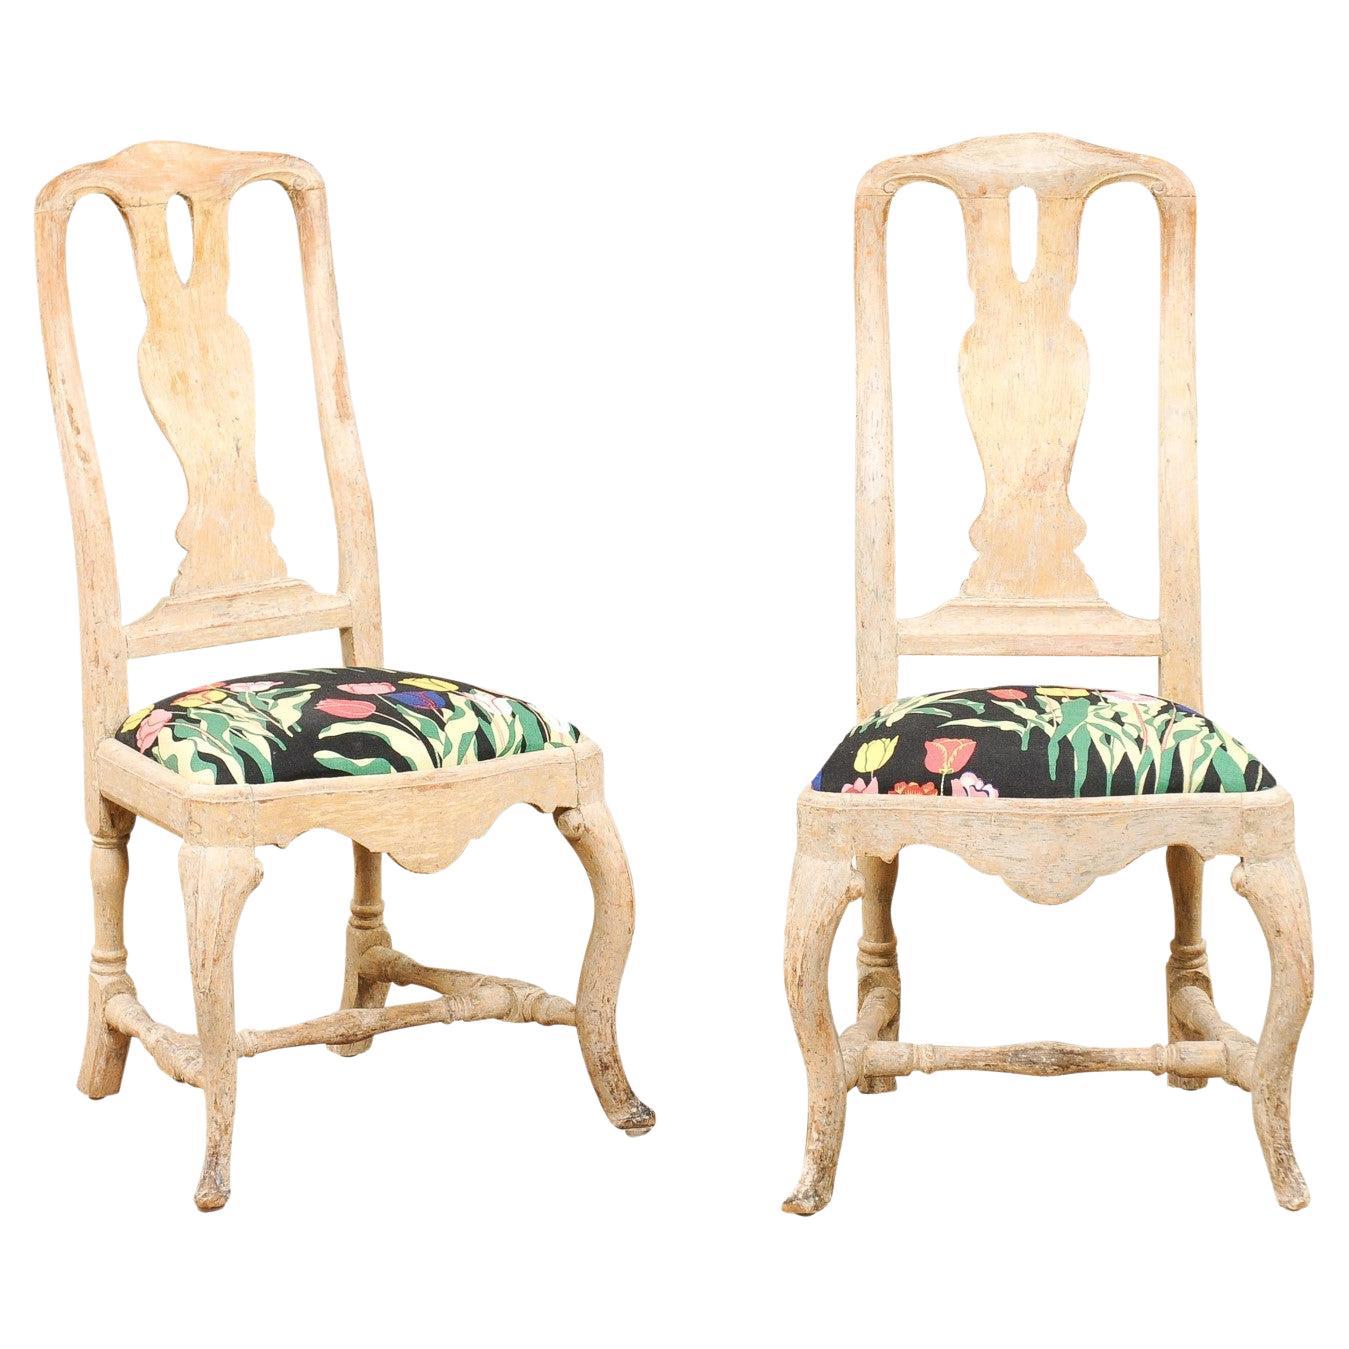 Pair of Swedish Rococo Period 18th Century Side Chairs with Carved Splats For Sale